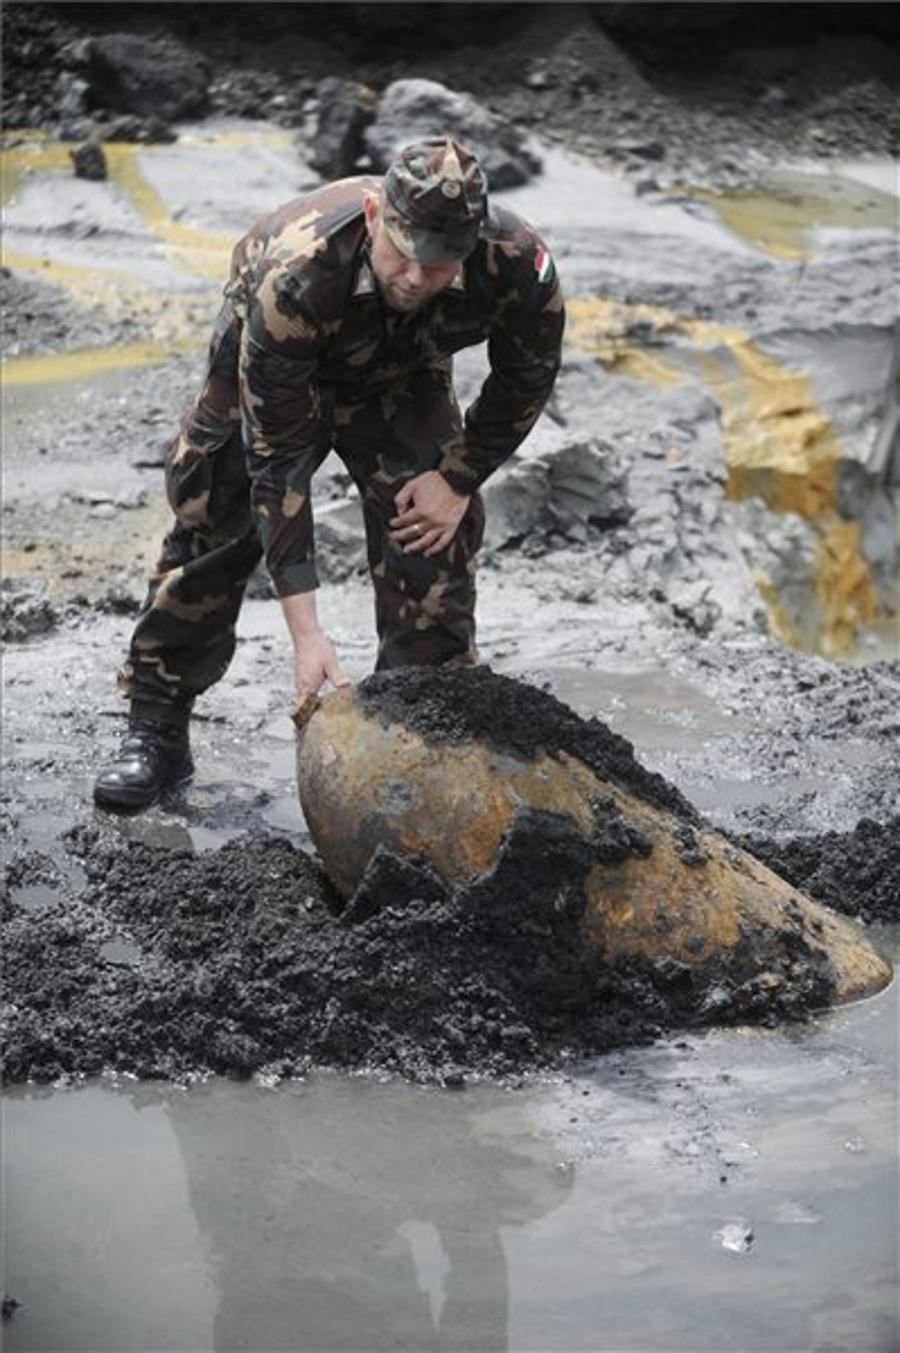 WW2 Bomb Weighing Hundreds Of Kilos Found In South Buda, Area Closed